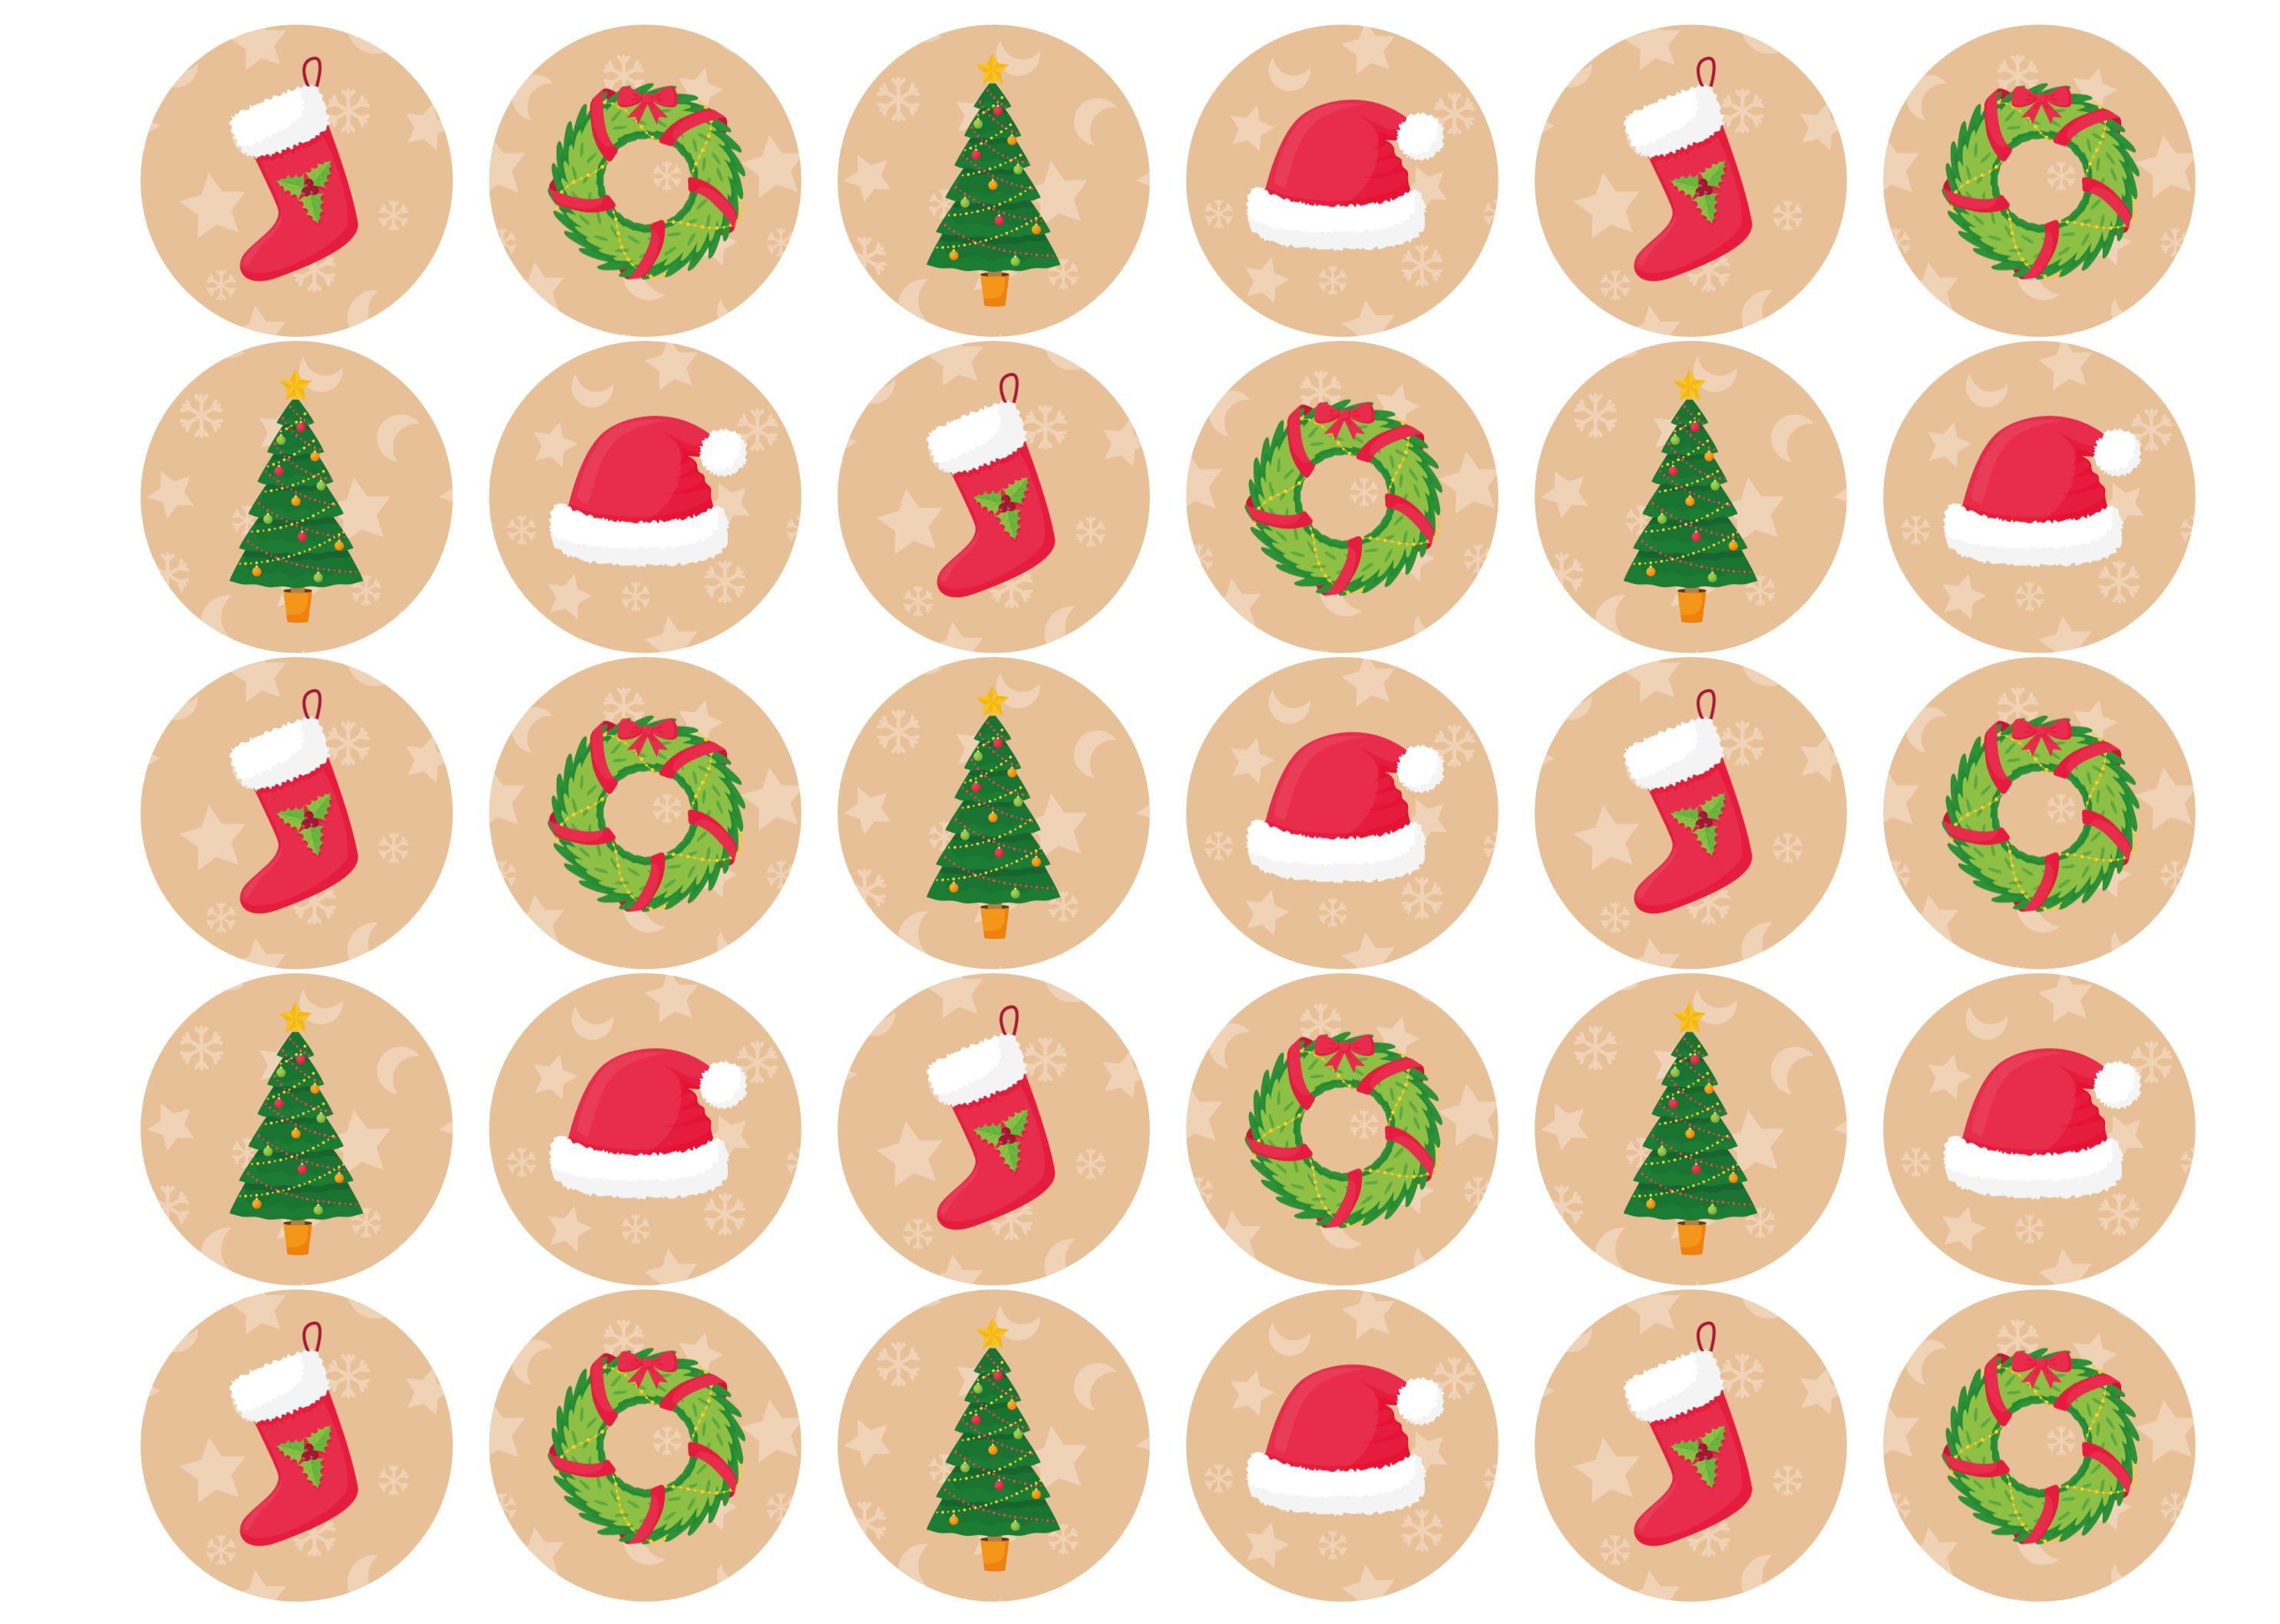 30 edible cupcake toppers with Christmas designs